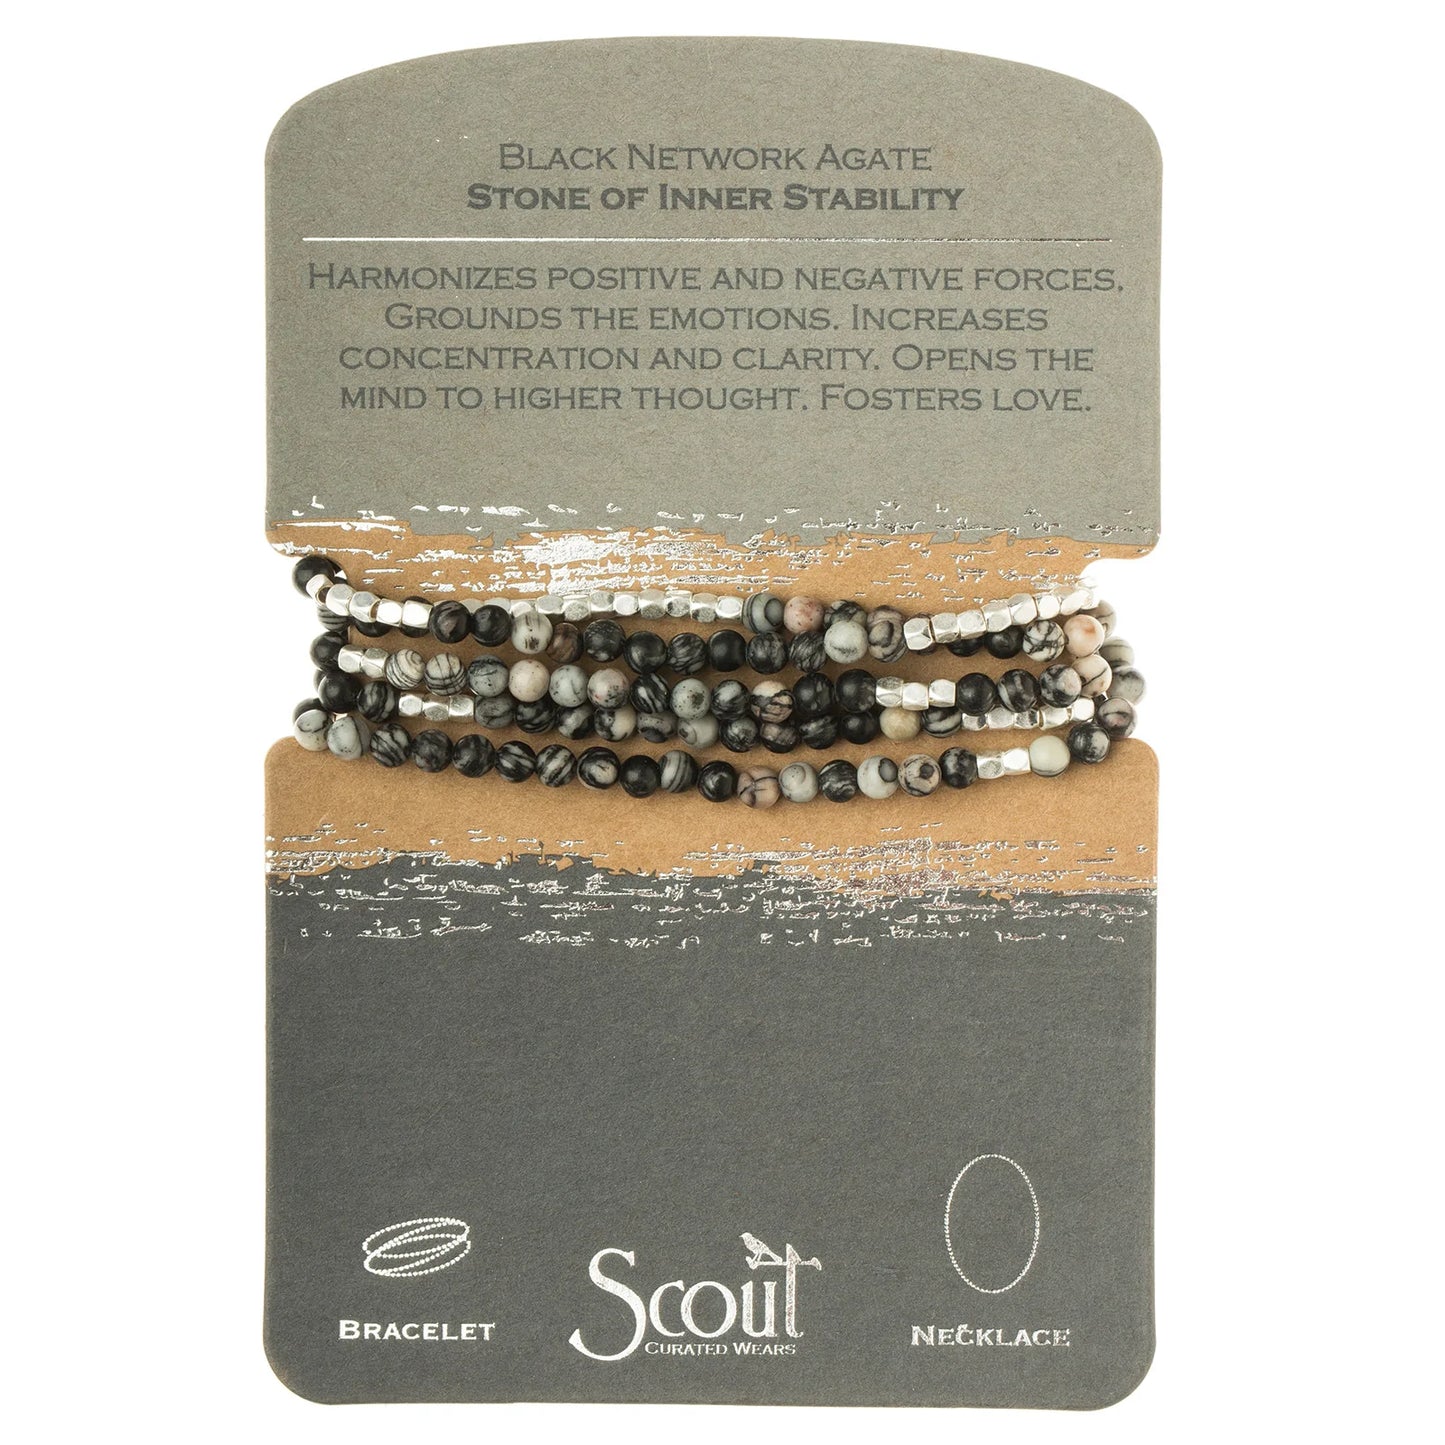 Scout Curated Wears Stone Wrap Bracelet/Necklace - Black Network Agate - Stone of Inner Stability available at The Good Life Boutique